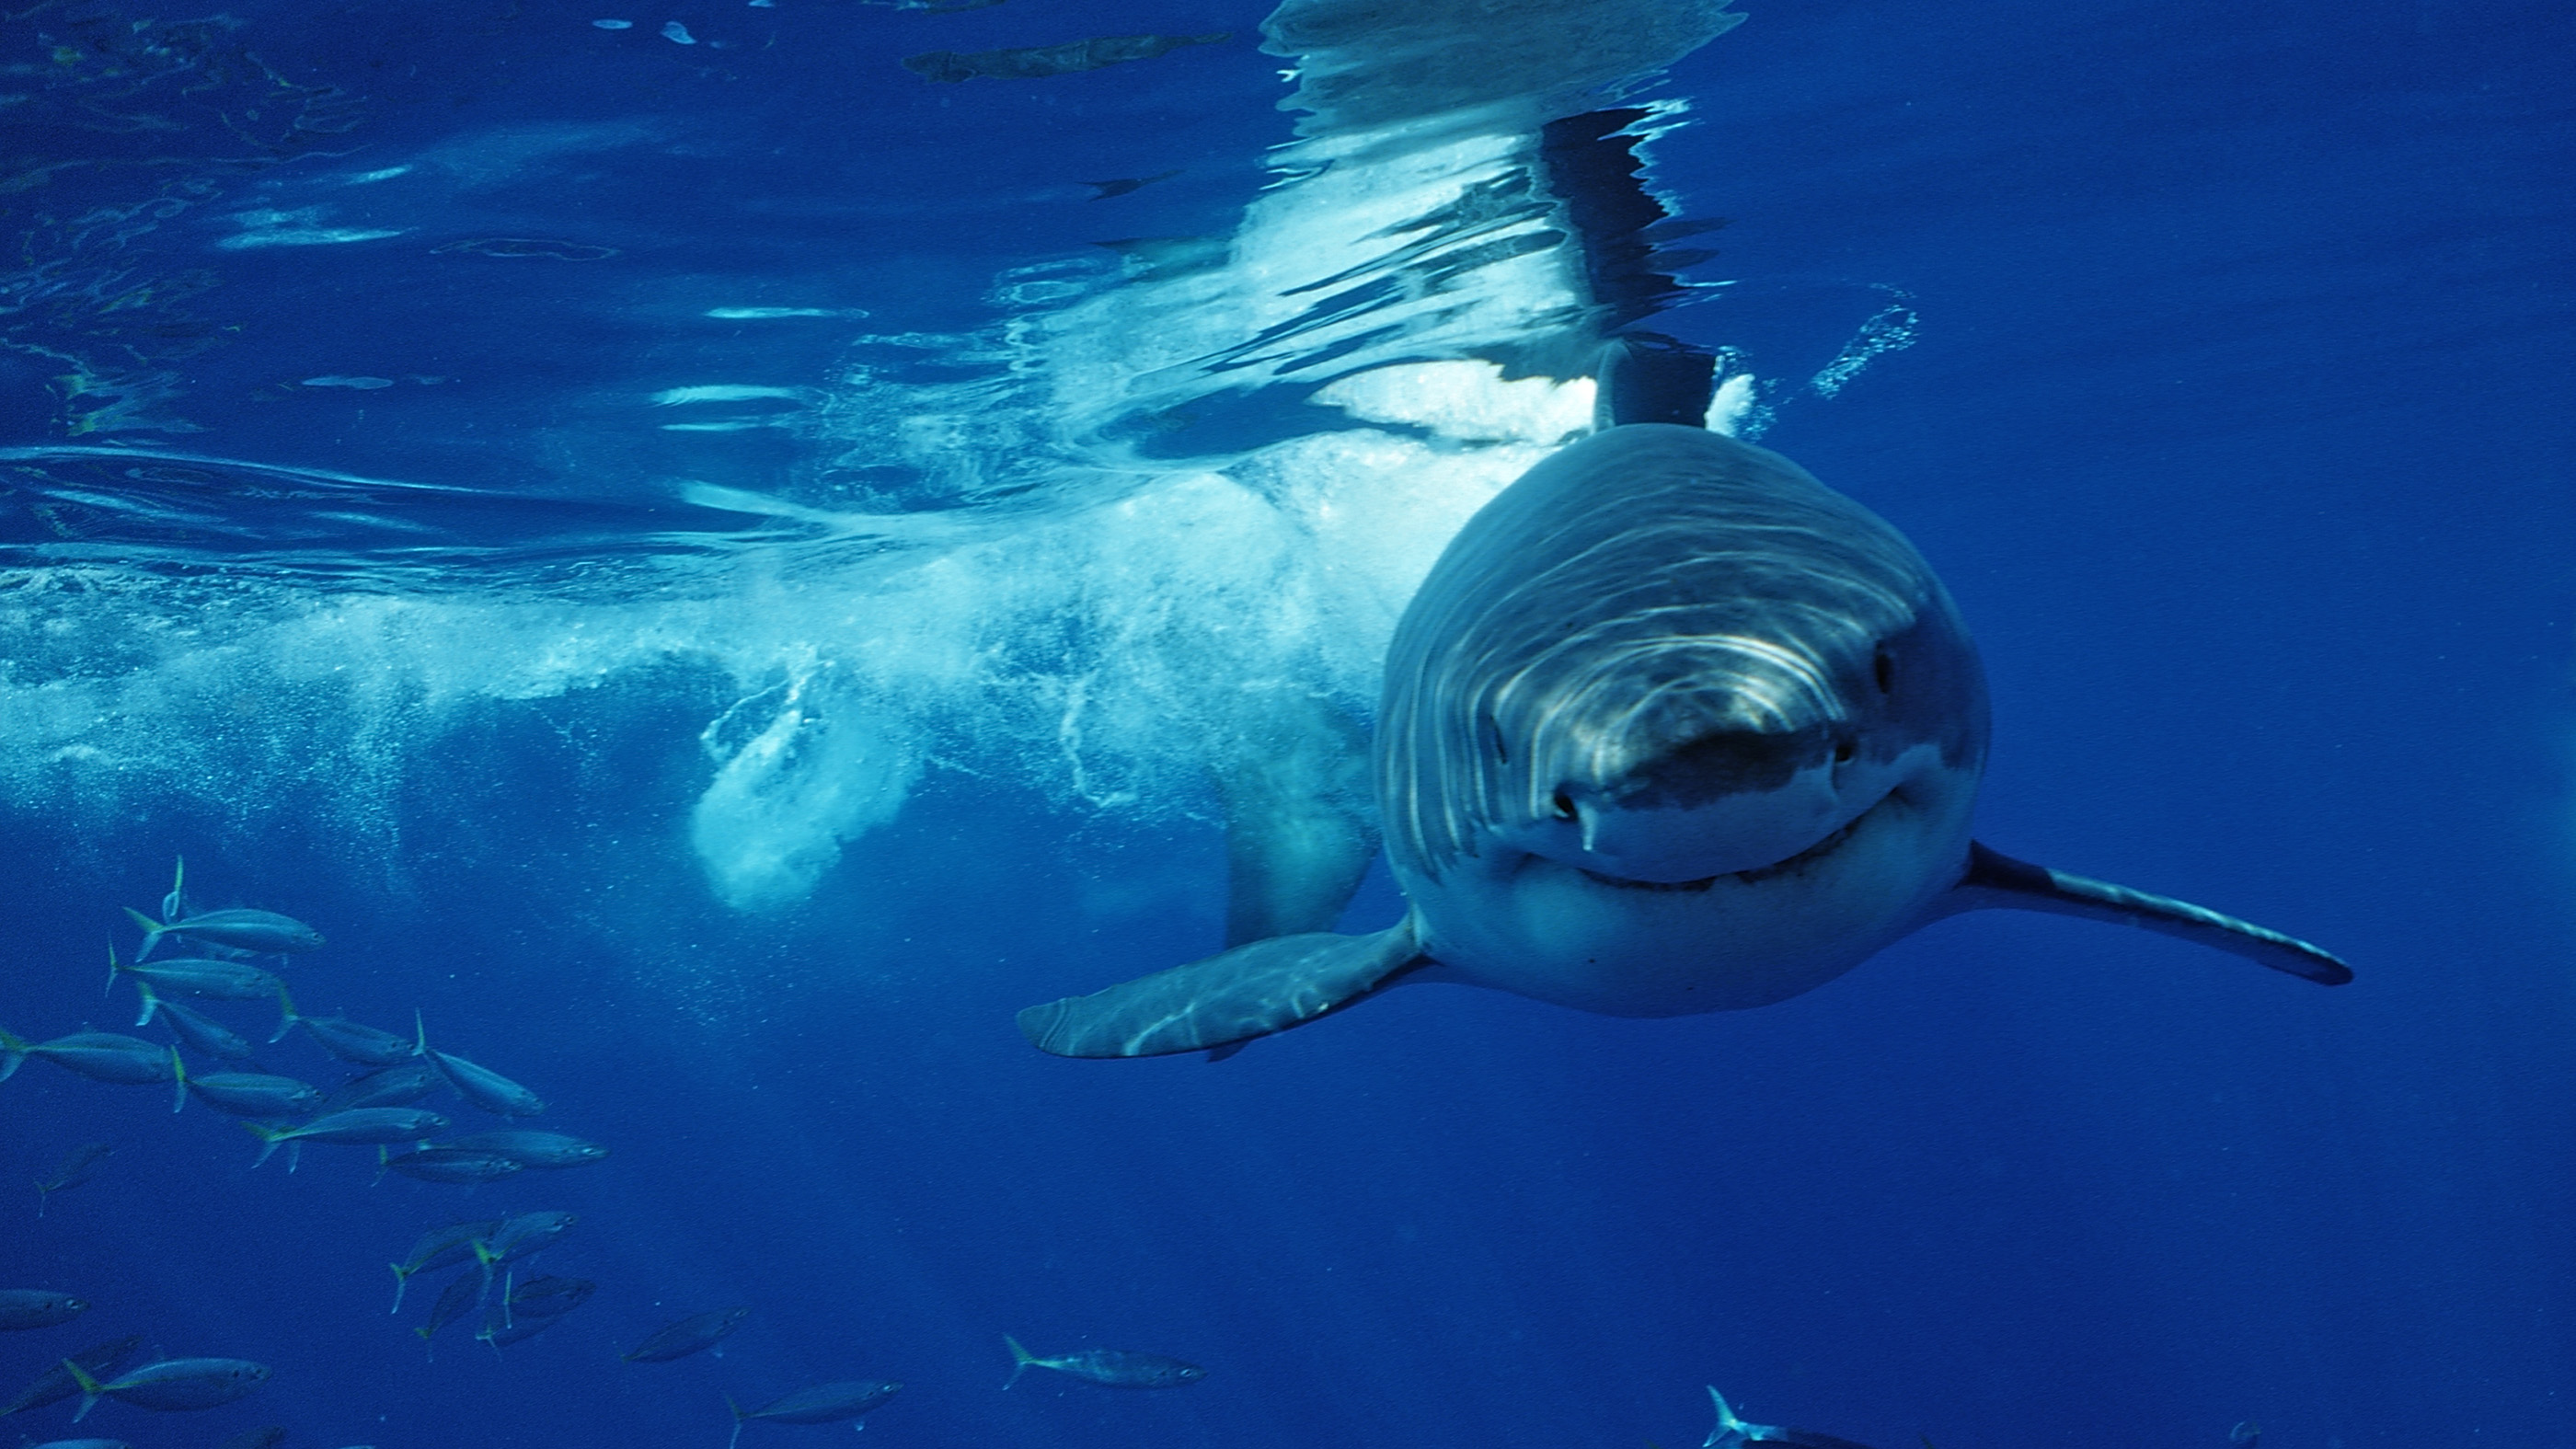 Great white sharks: The world's largest predatory fish | Live Science